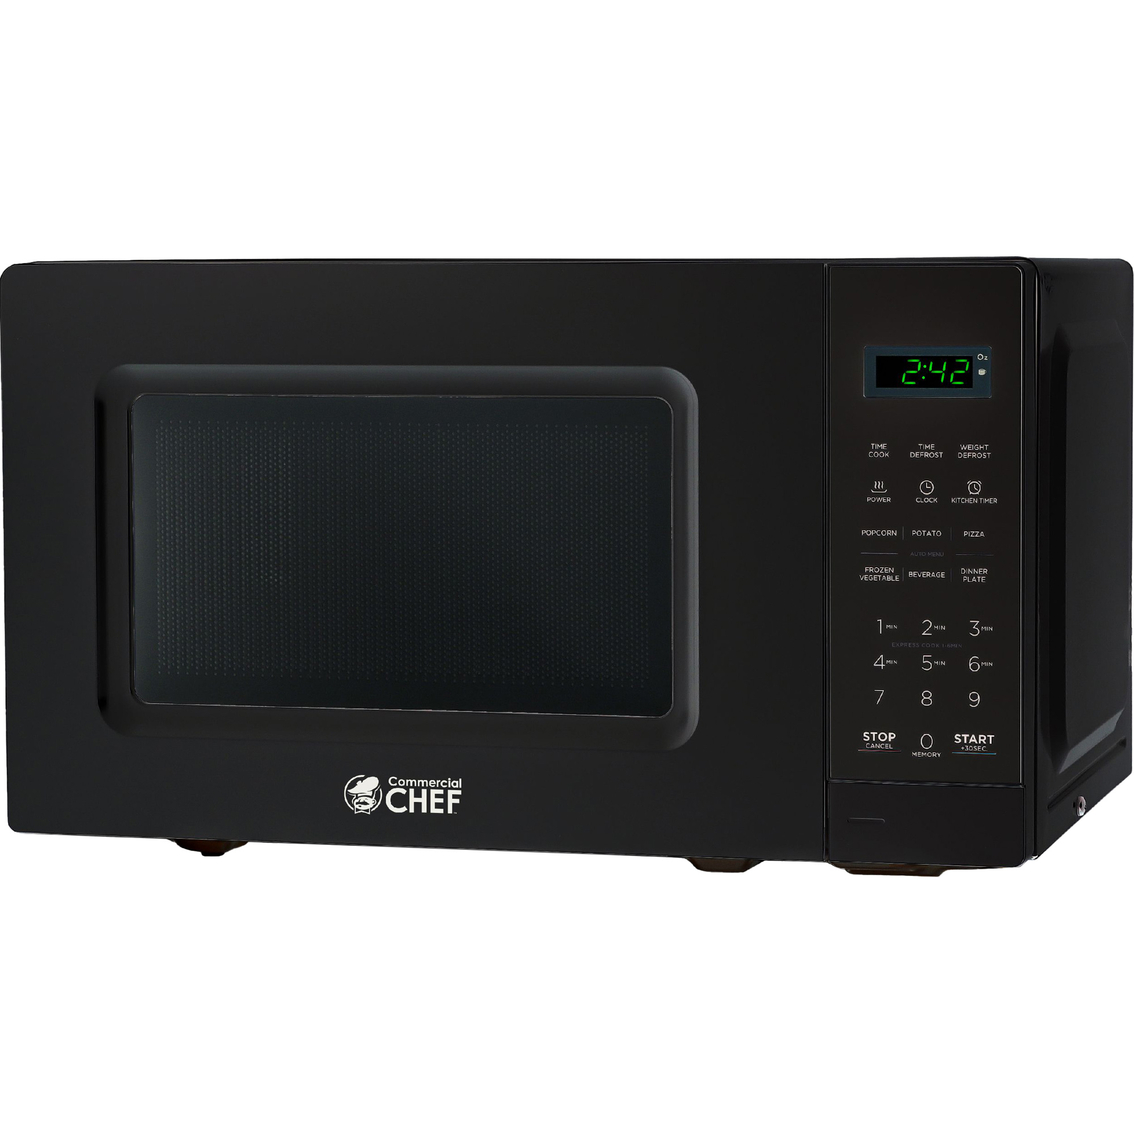 Commercial Chef 0.7 Cu. Ft. Countertop Microwave Oven - Image 1 of 7